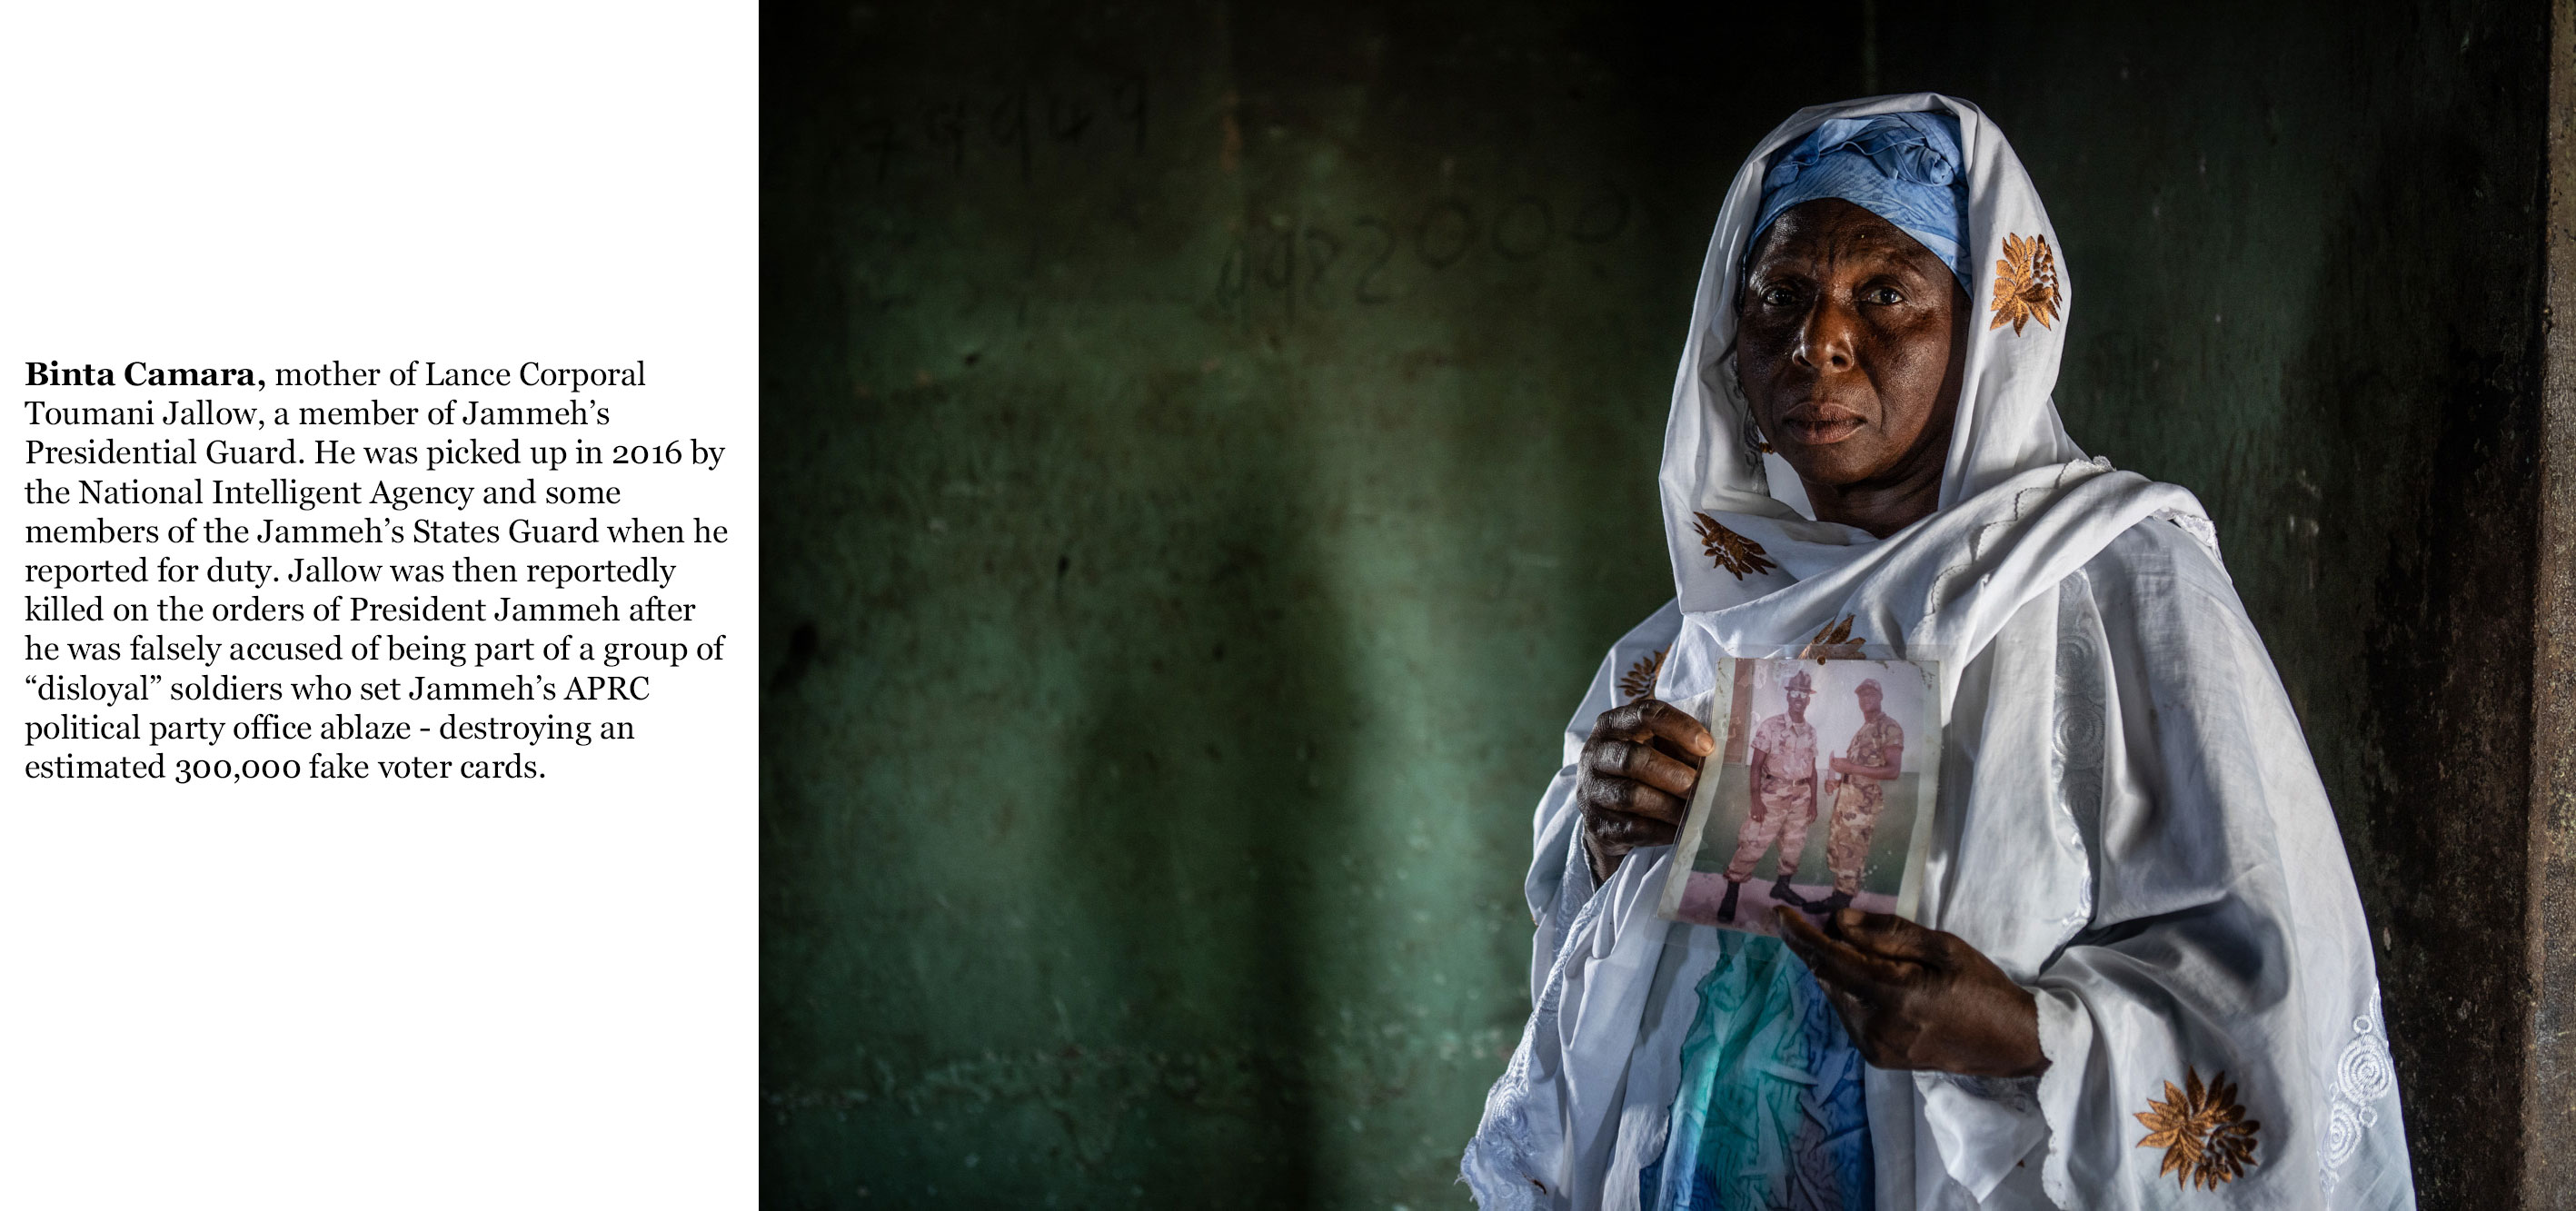 Gambia victims and resisters -binta_camara mother of Lance Corporal Toumani Jallow killed on the orders of Jammeh in 2016 -3719_TEXT_WEB©Jason Florio 